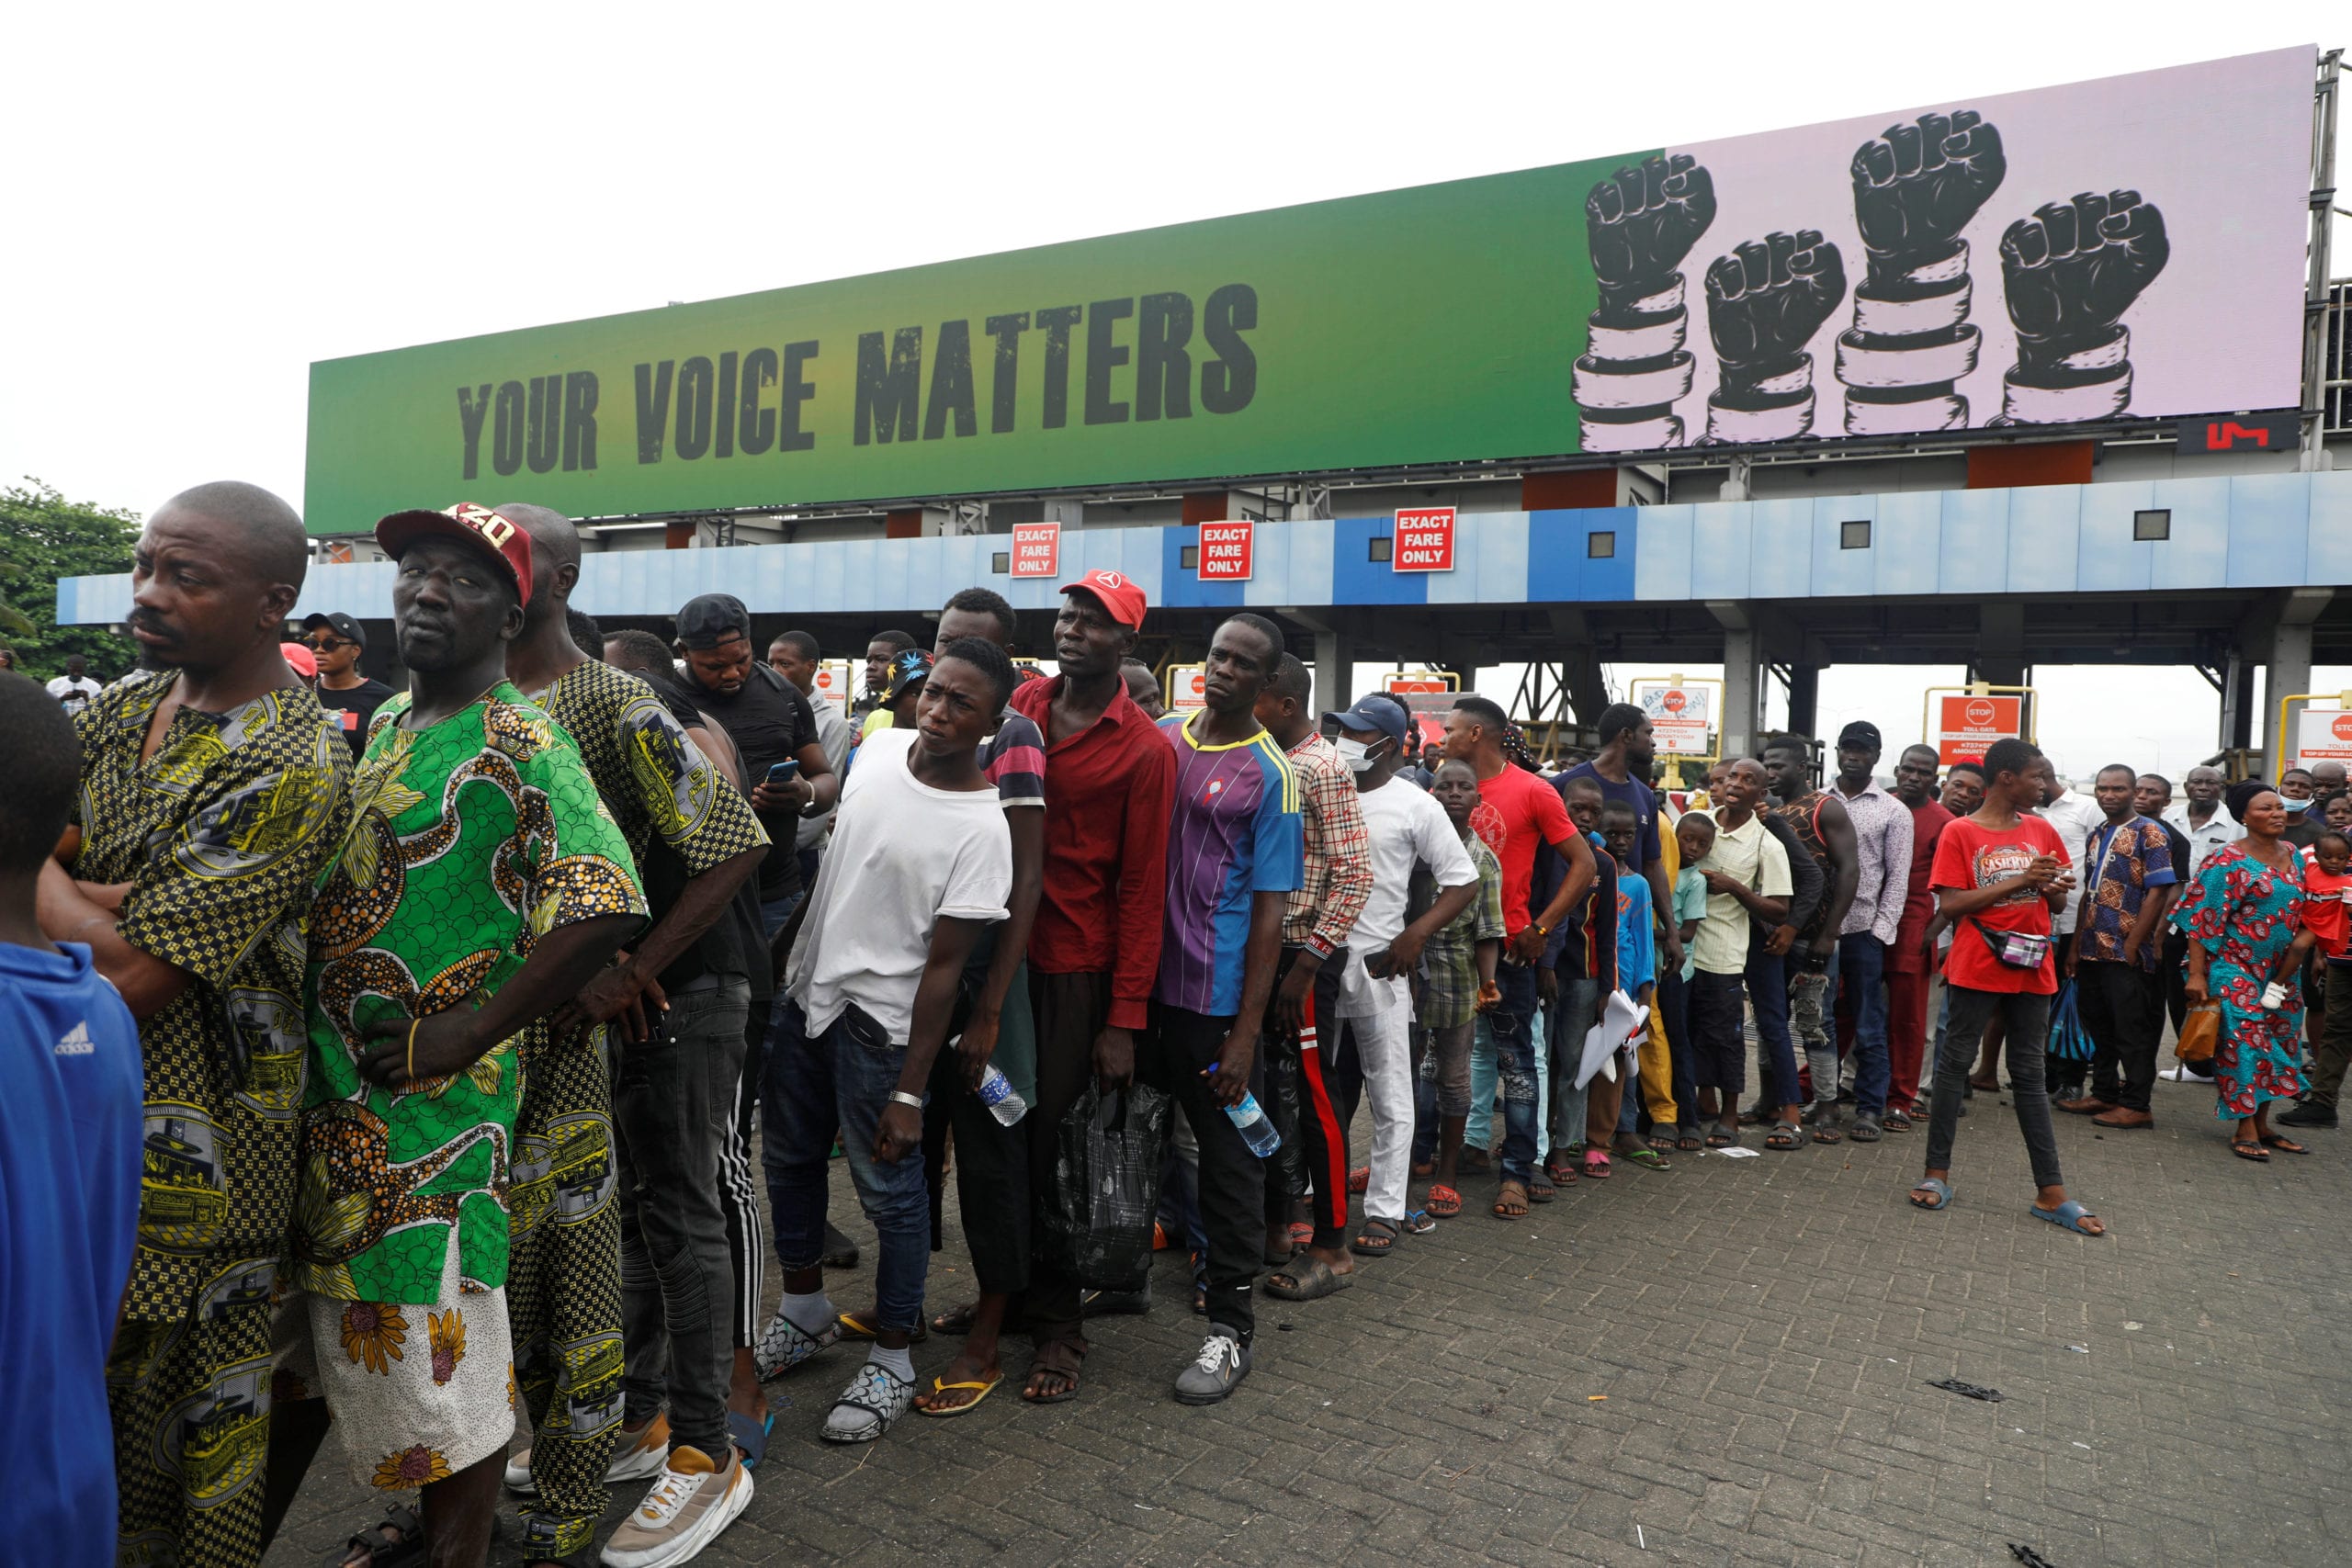 Demonstrators queue up to receive food during a protest over police brutality in Lagos, Nigeria October 16, 2020. Picture taken October 16, 2020. REUTERS/Temilade Adelaja